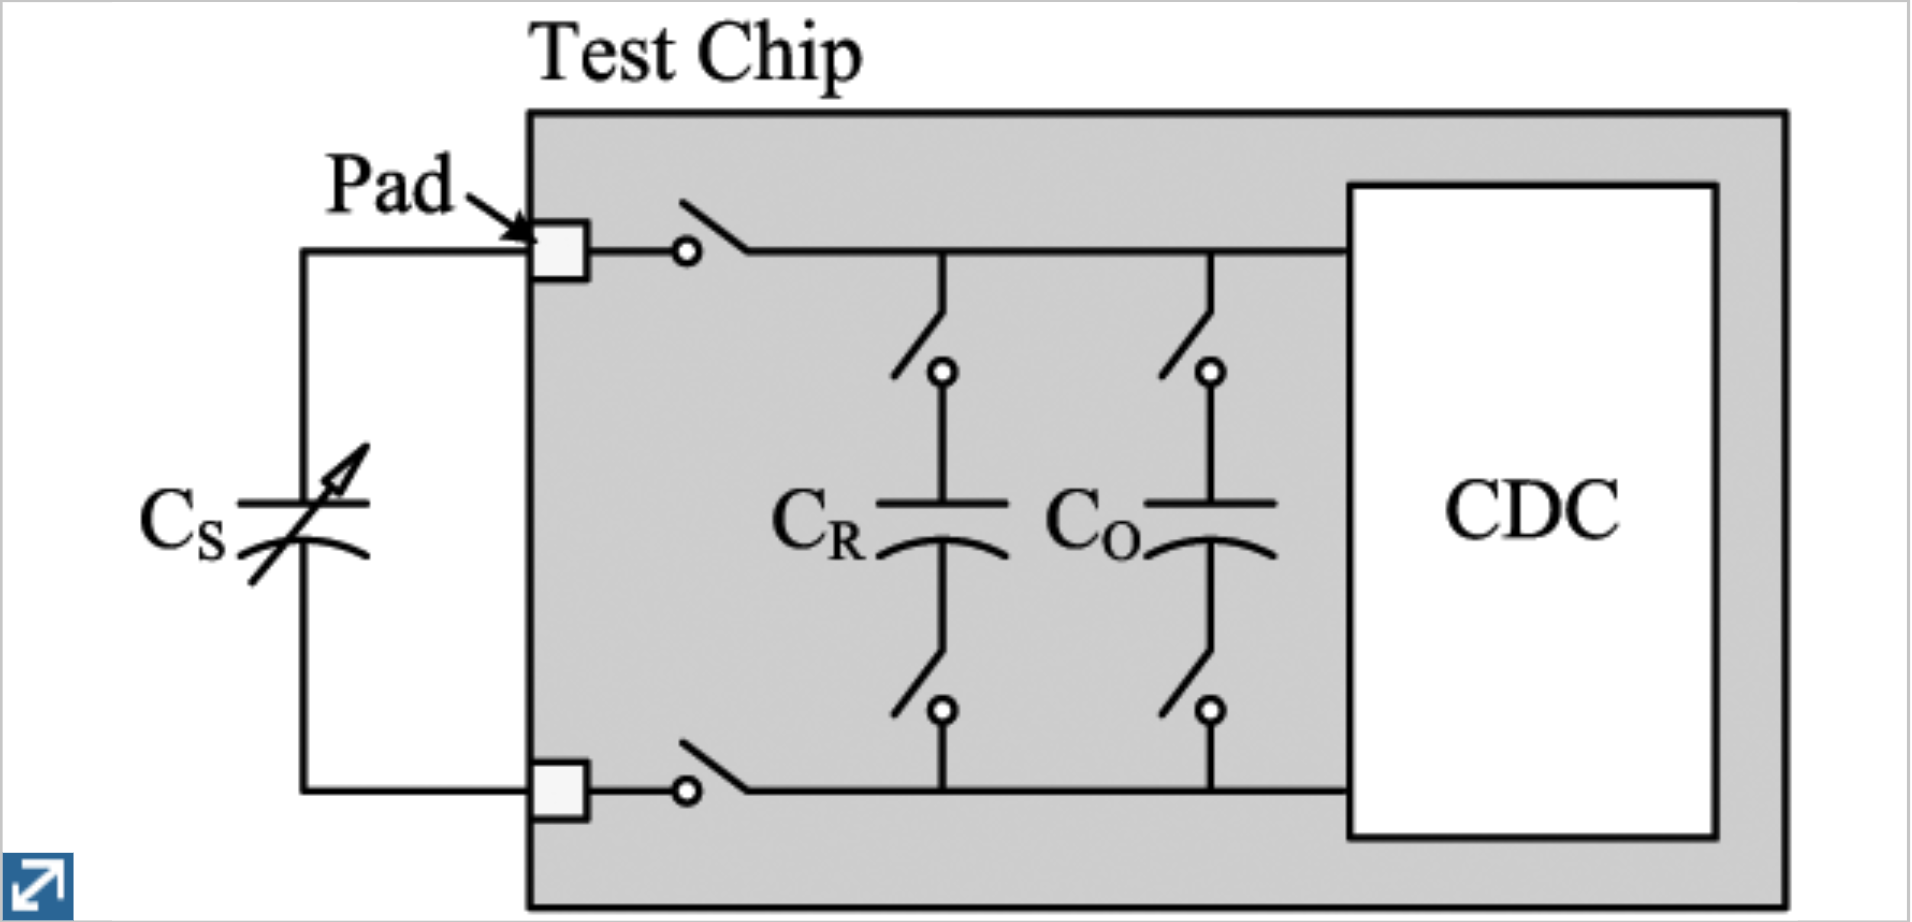 A 33fJ/Step SAR capacitance-to-digital converter using a chain of inverter-based amplifiers